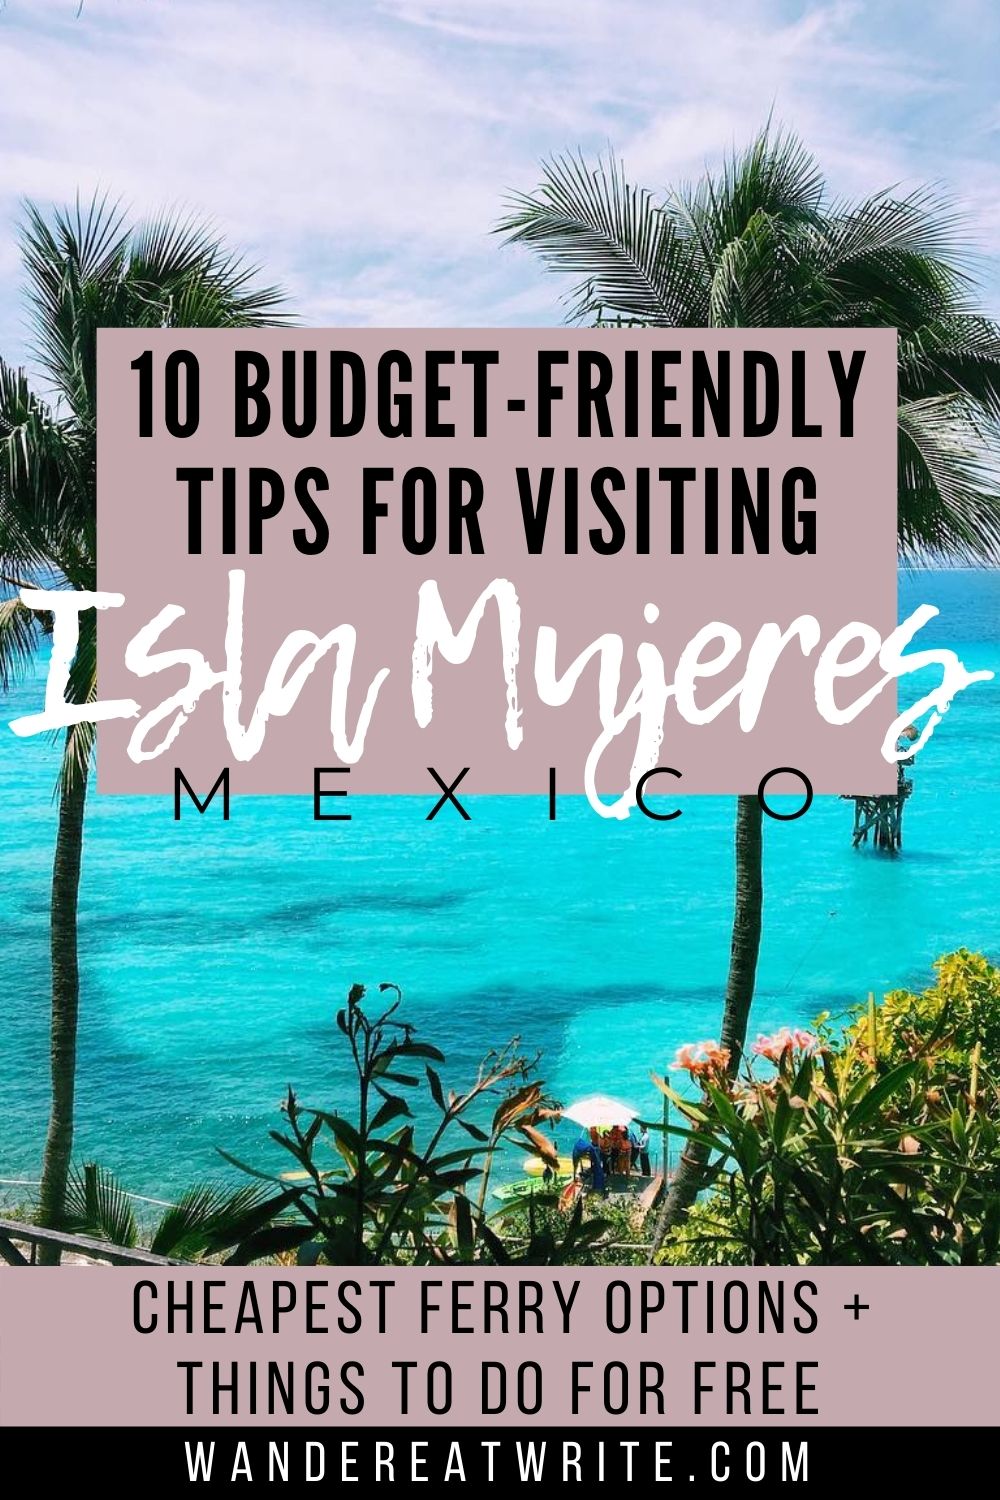 Isla Mujeres Travel Cost - Average Price of a Vacation to Isla Mujeres:  Food & Meal Budget, Daily & Weekly Expenses